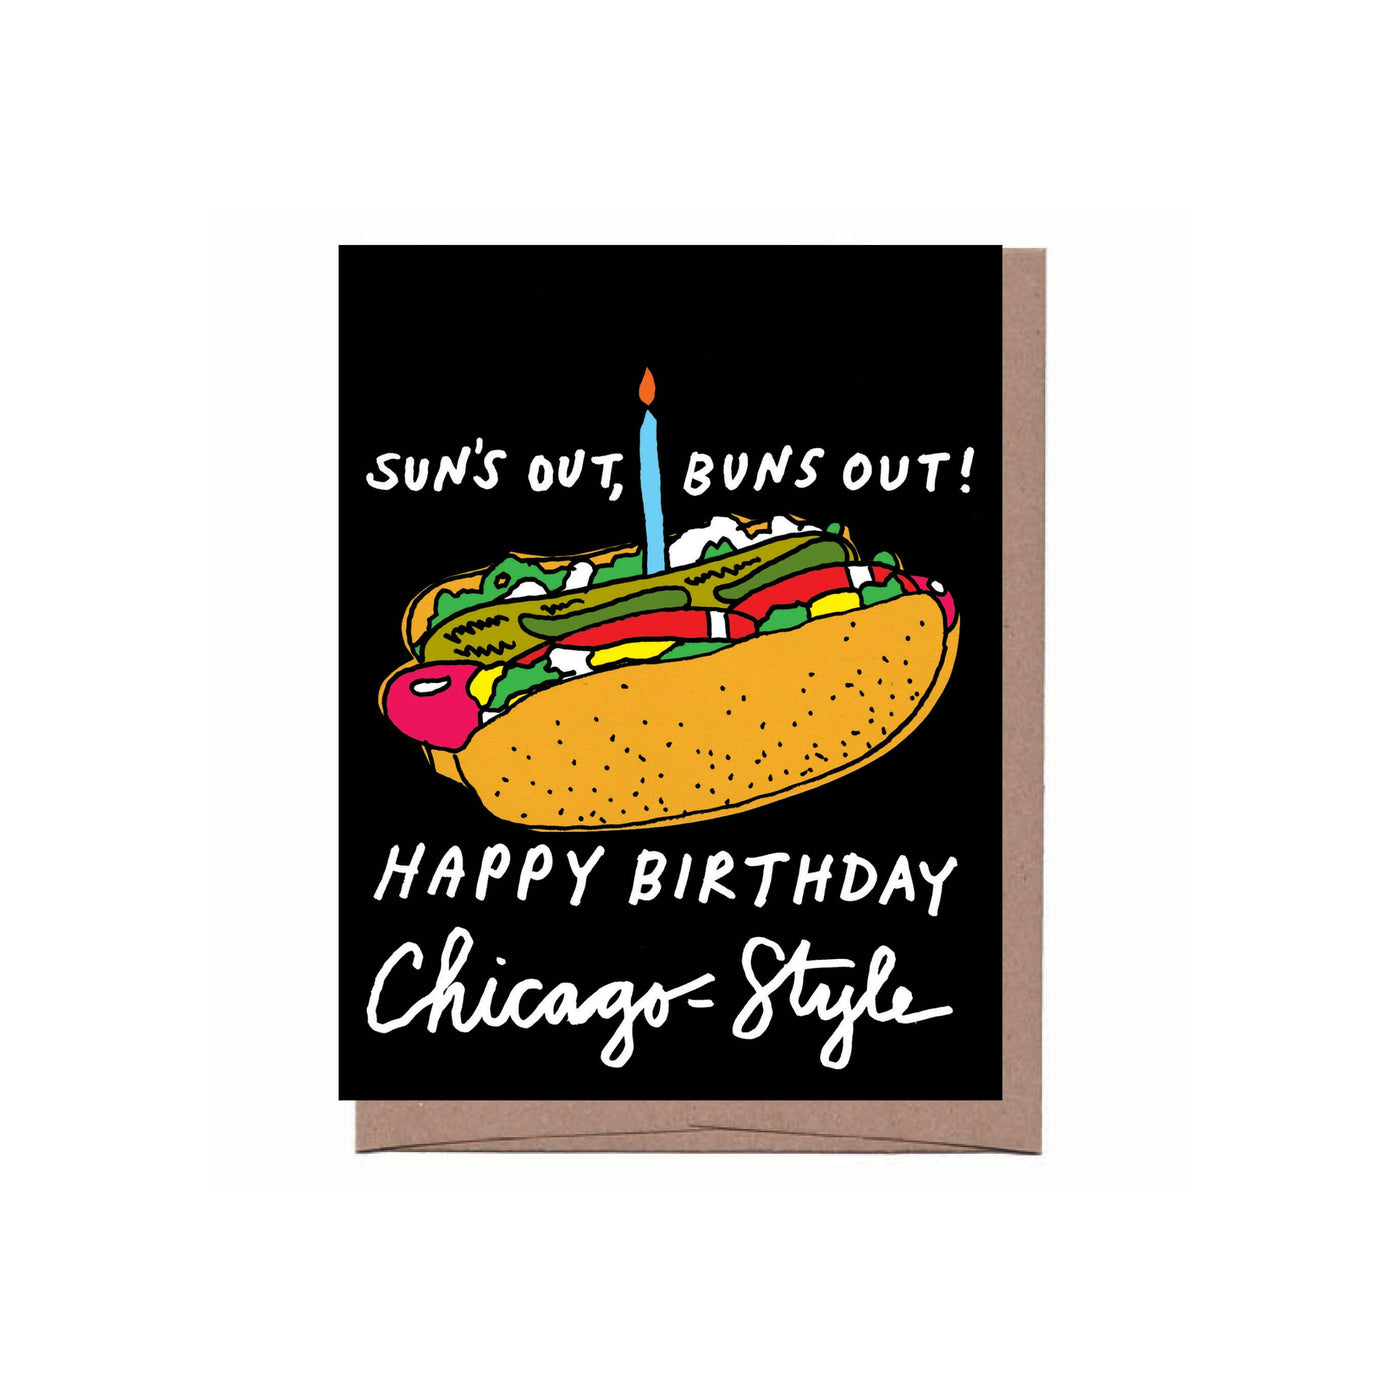 Buns Out Chicago Birthday Greeting Card